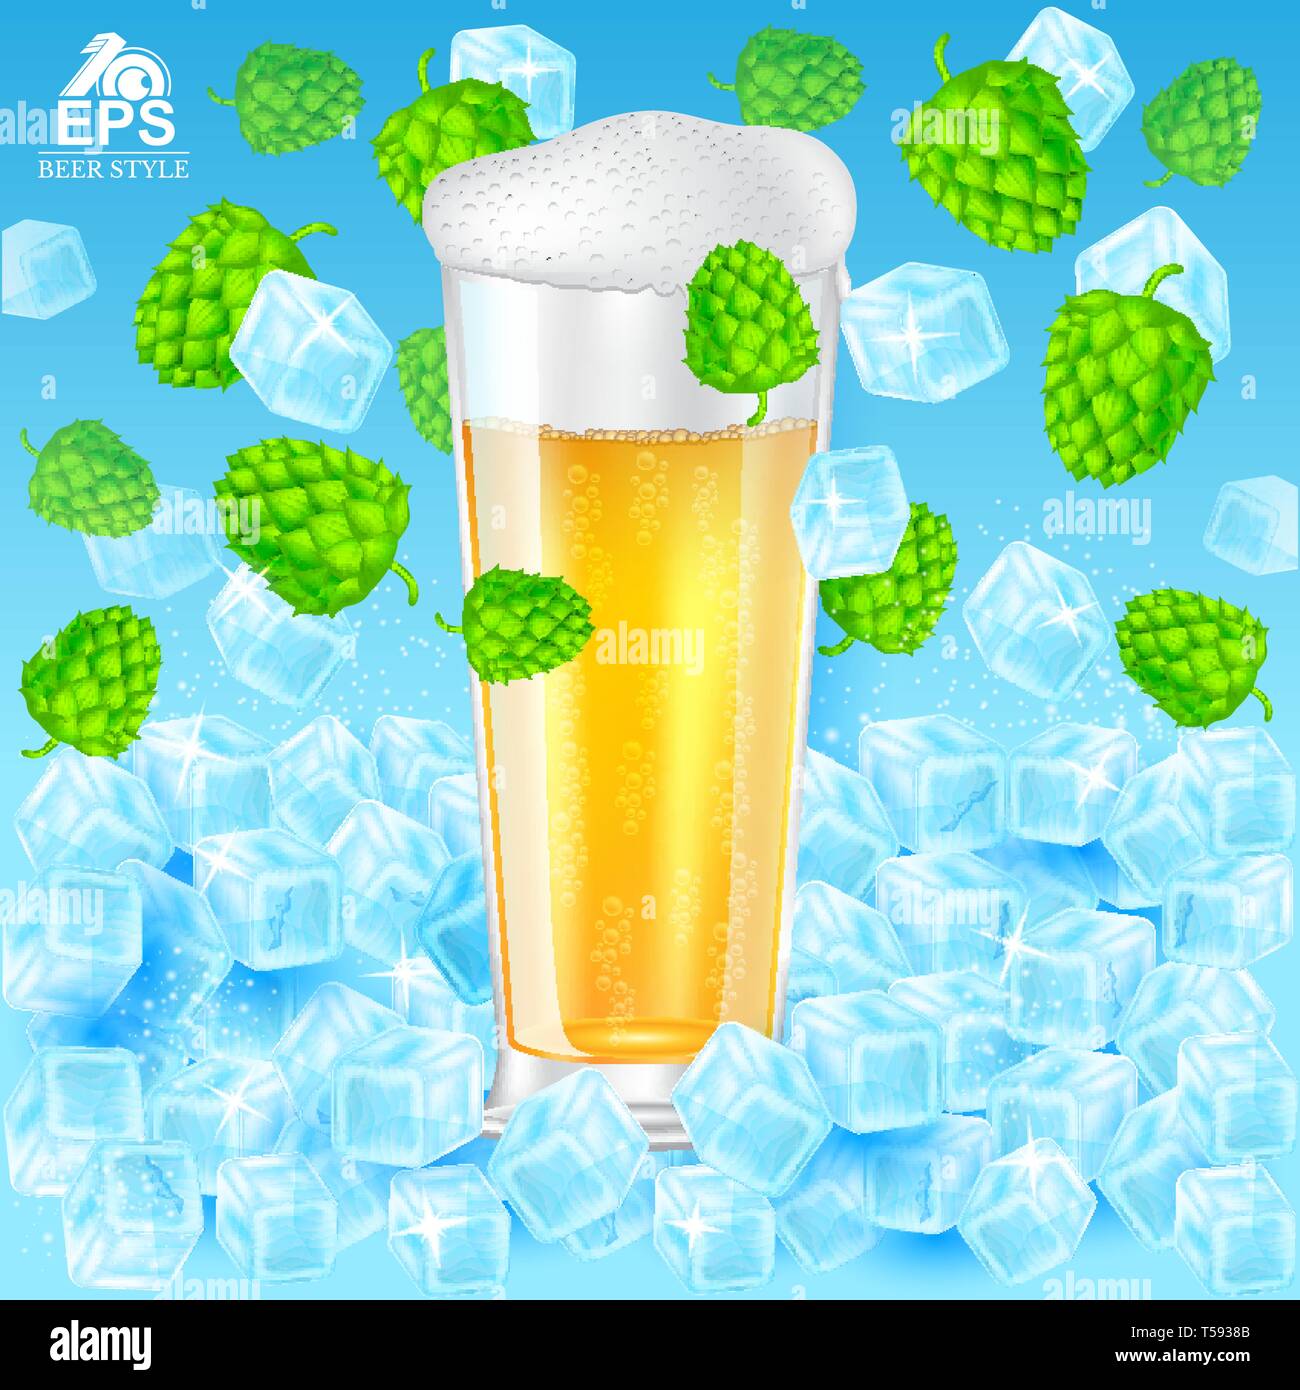 Realistic mock up glass of beer with foam stand in ice cubes among hop cones and ice on blue background Stock Vector